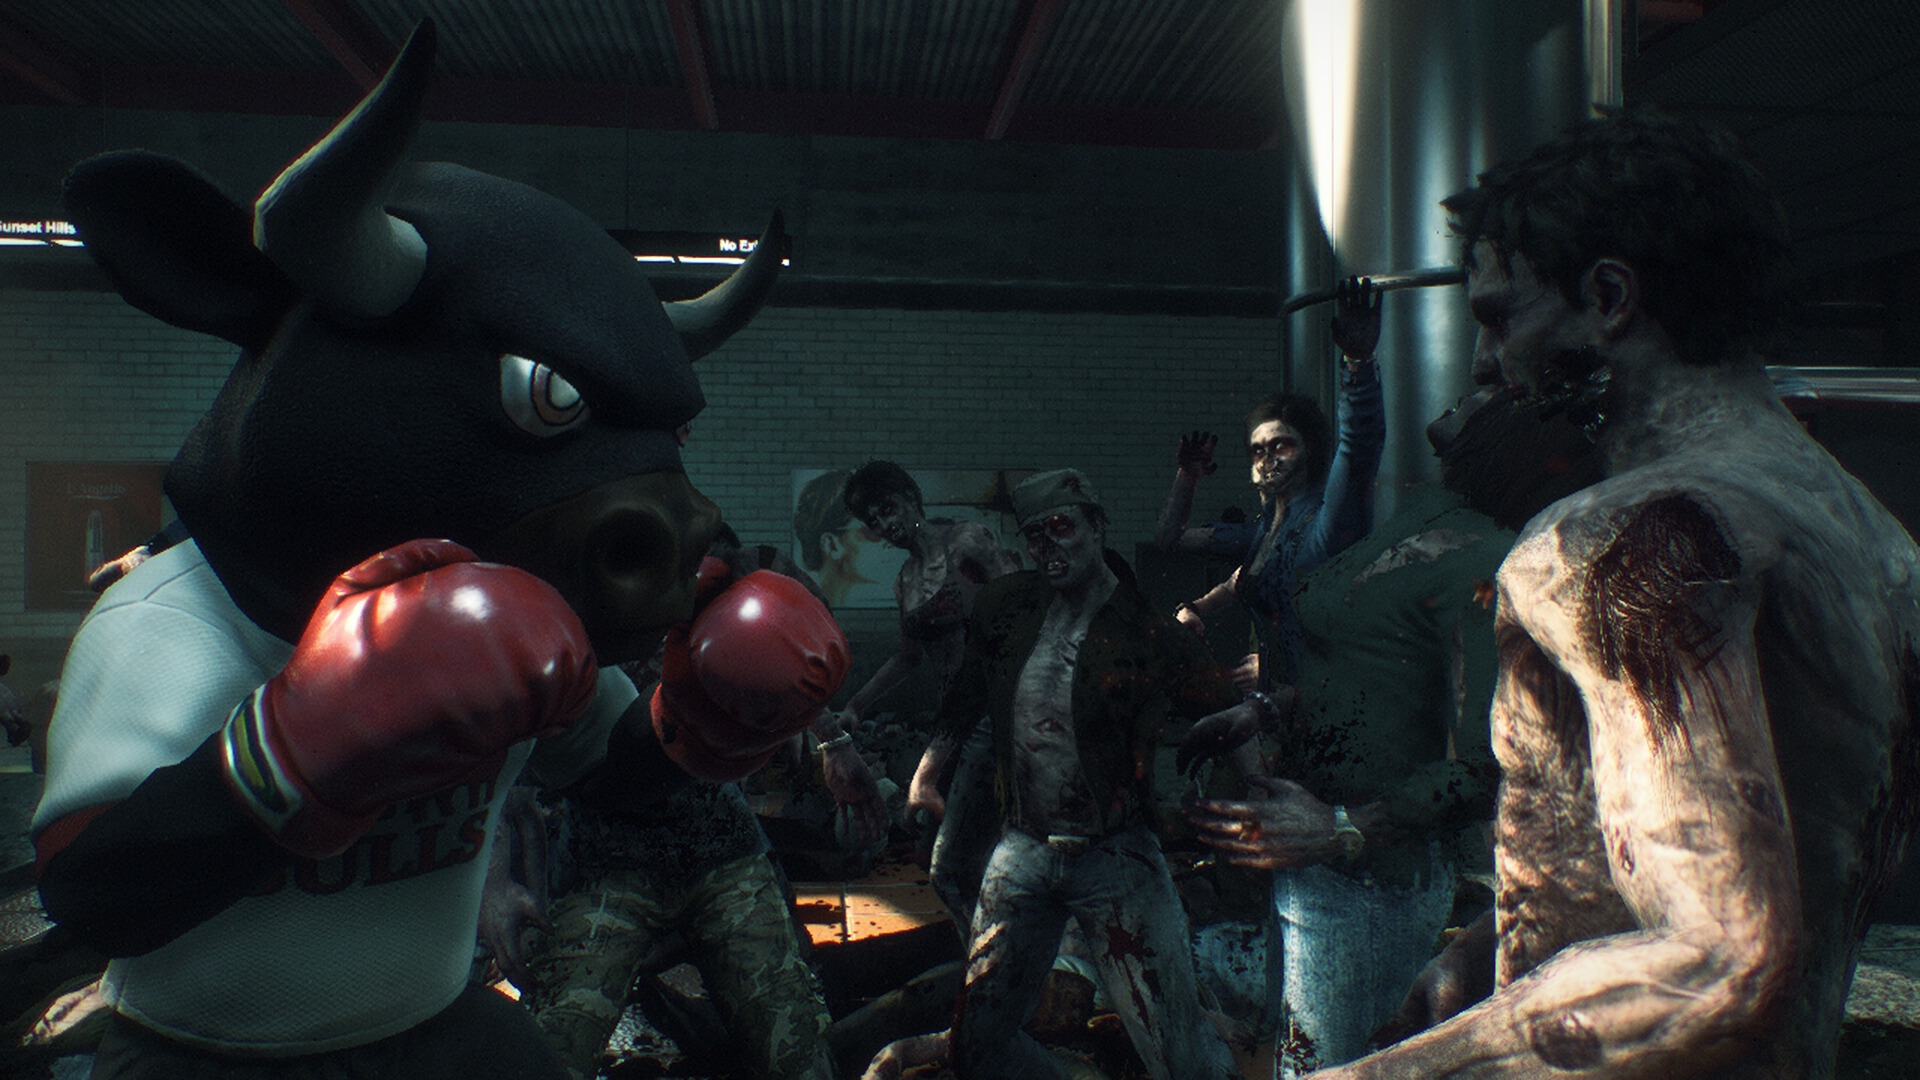 Dead Rising 3 Will Be Gritty, But Not Too Gritty